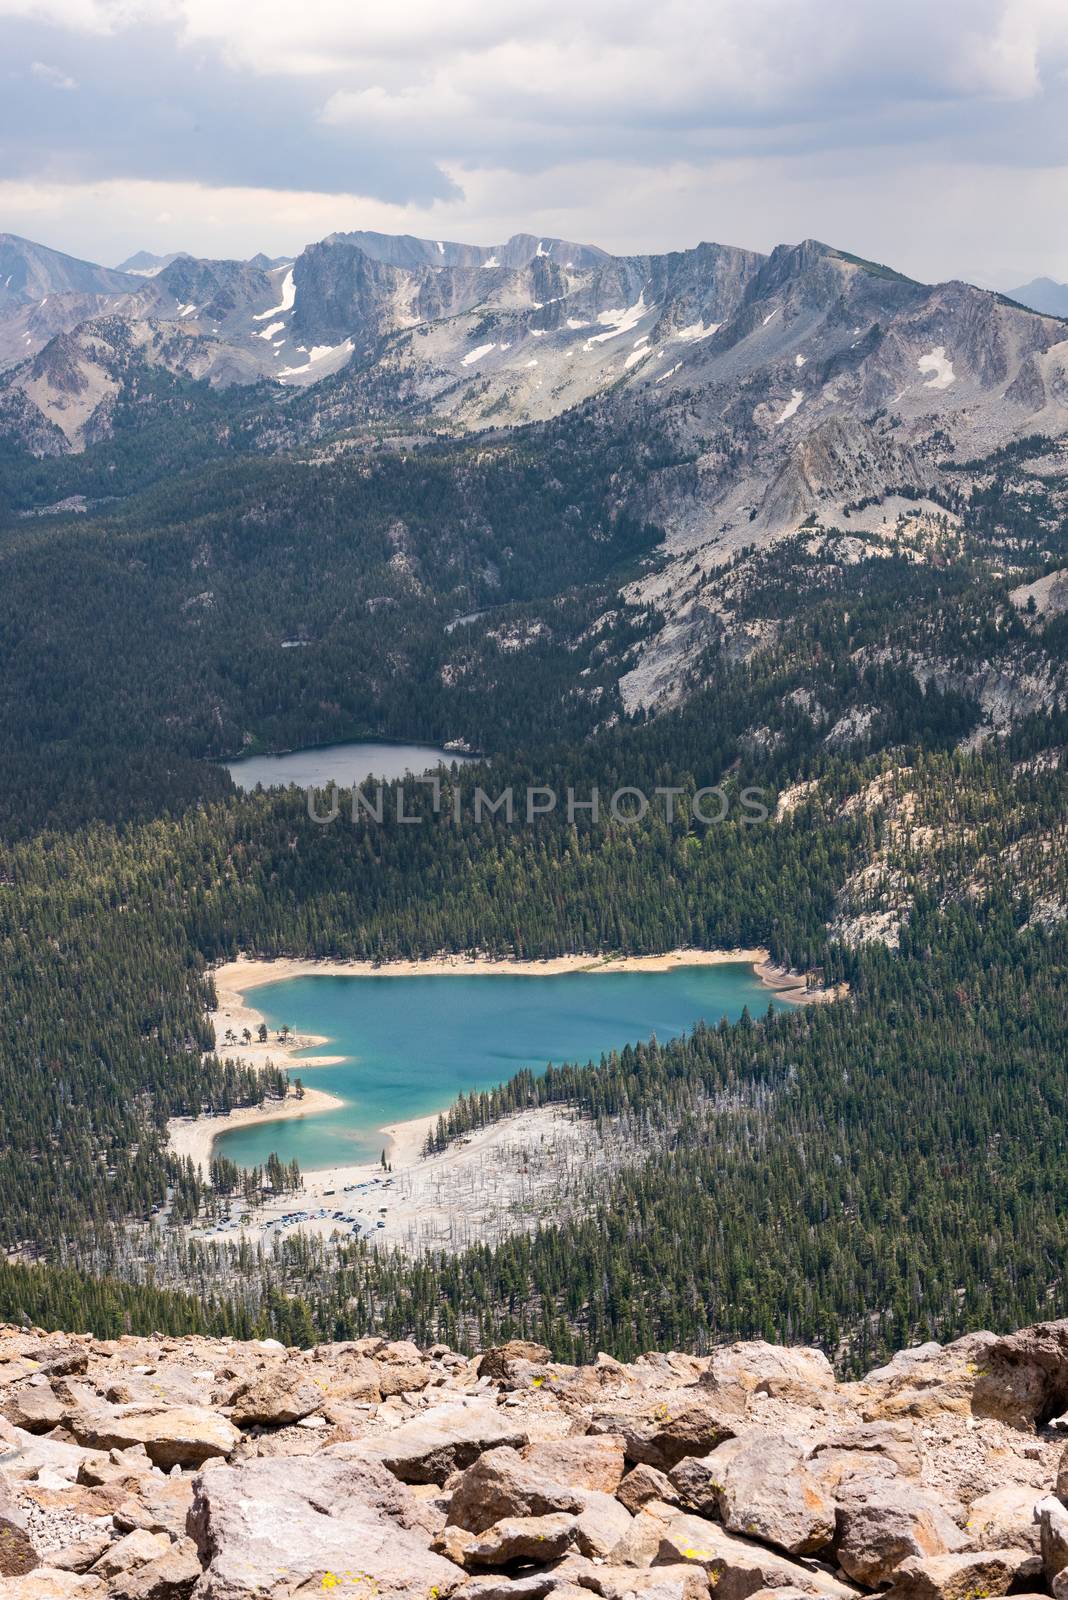 Looking down on a valley with the sub-alpine lakes of Horseshoe and George from the top of Mammoth Mountain, California by Njean